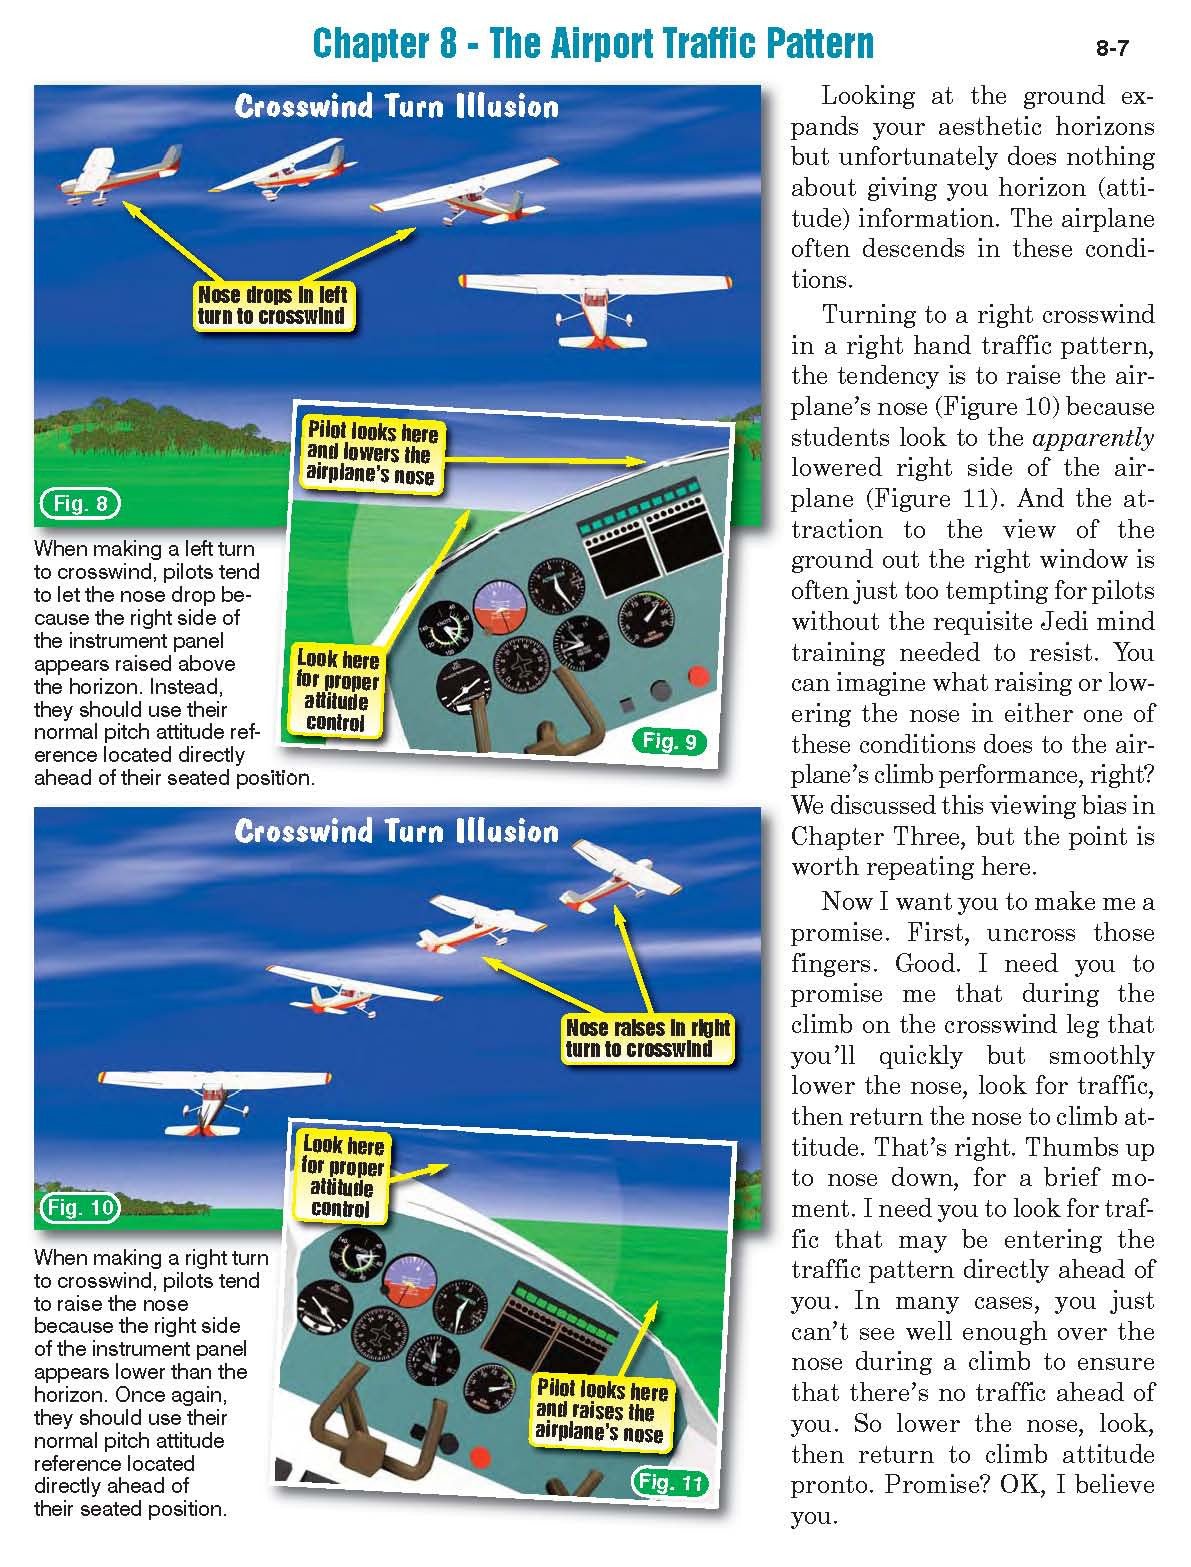 The Rod Machado's How to Fly an Airplane Handbook (Book or eBook) chapter 1.